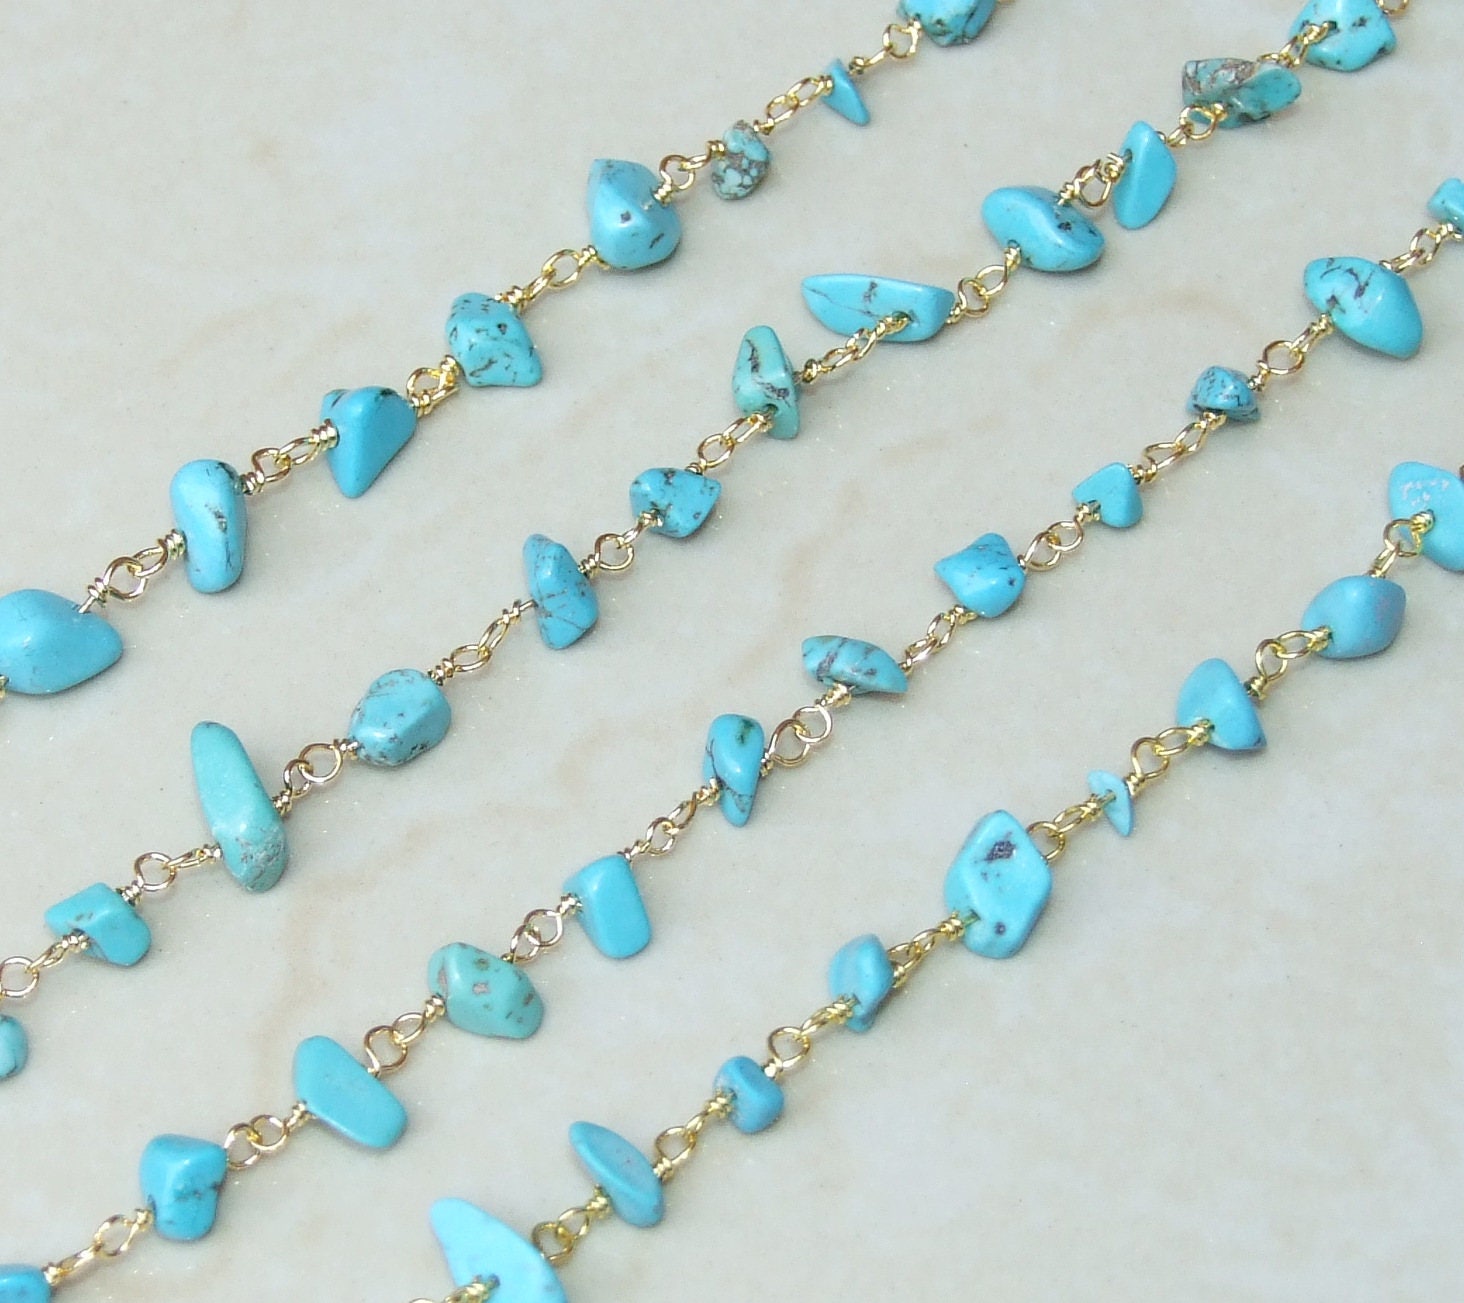 Turquoise Rosary Chain by the Foot, Rosary Chain with Beads, Rosary Chain Wholesale, Rosary Chain Bulk, Rosary Chain for Jewelry Making